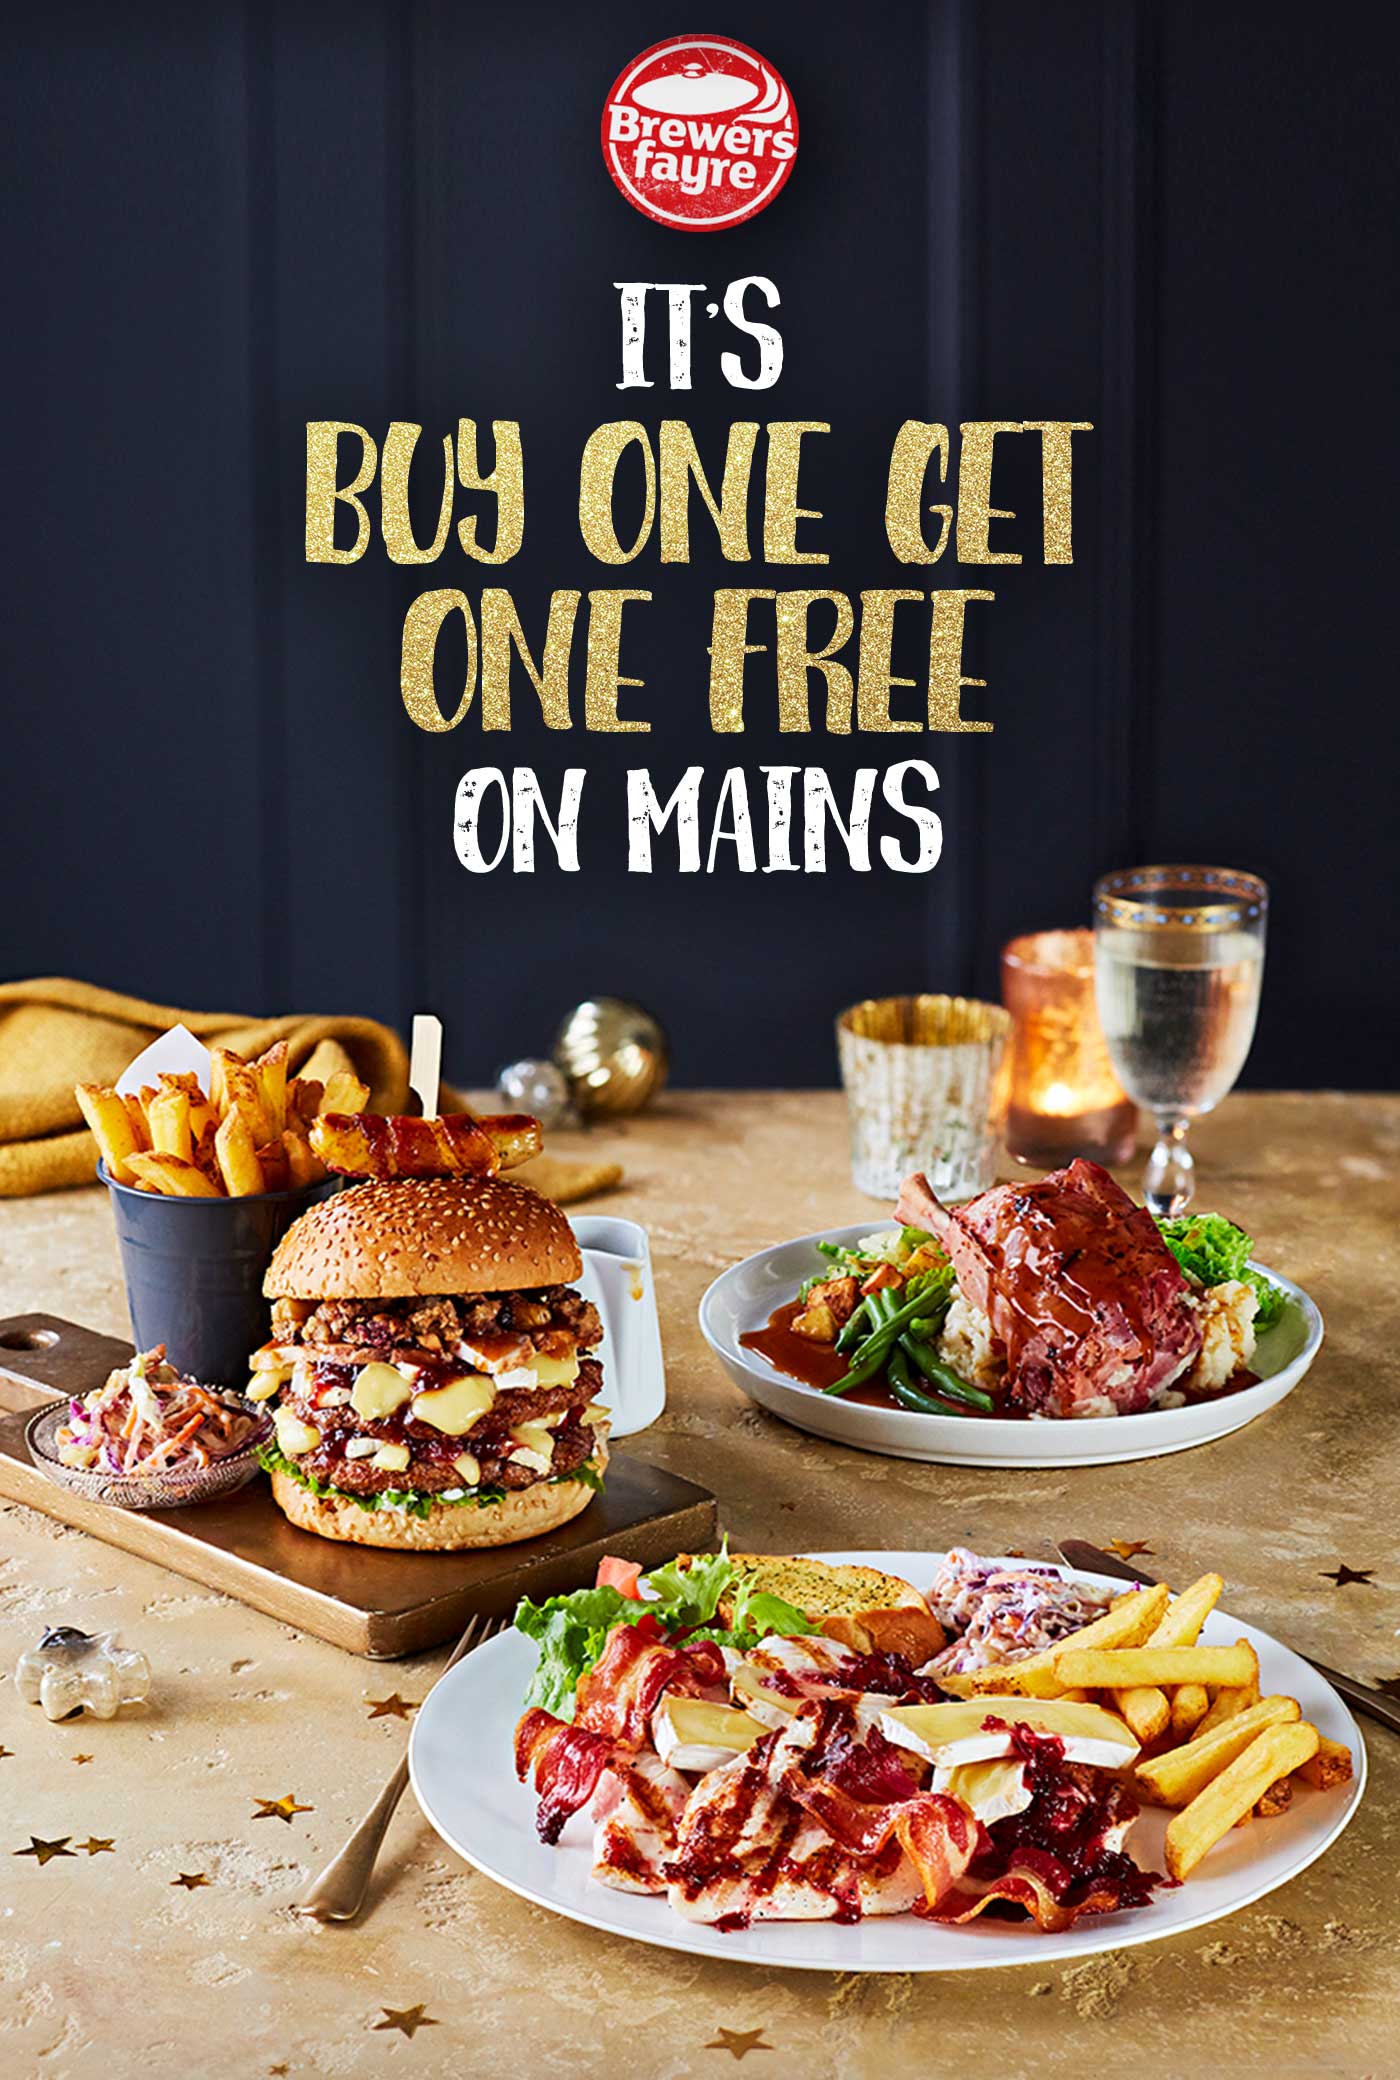 IT'S BUY ONE GET ONE FREE ON MAINS